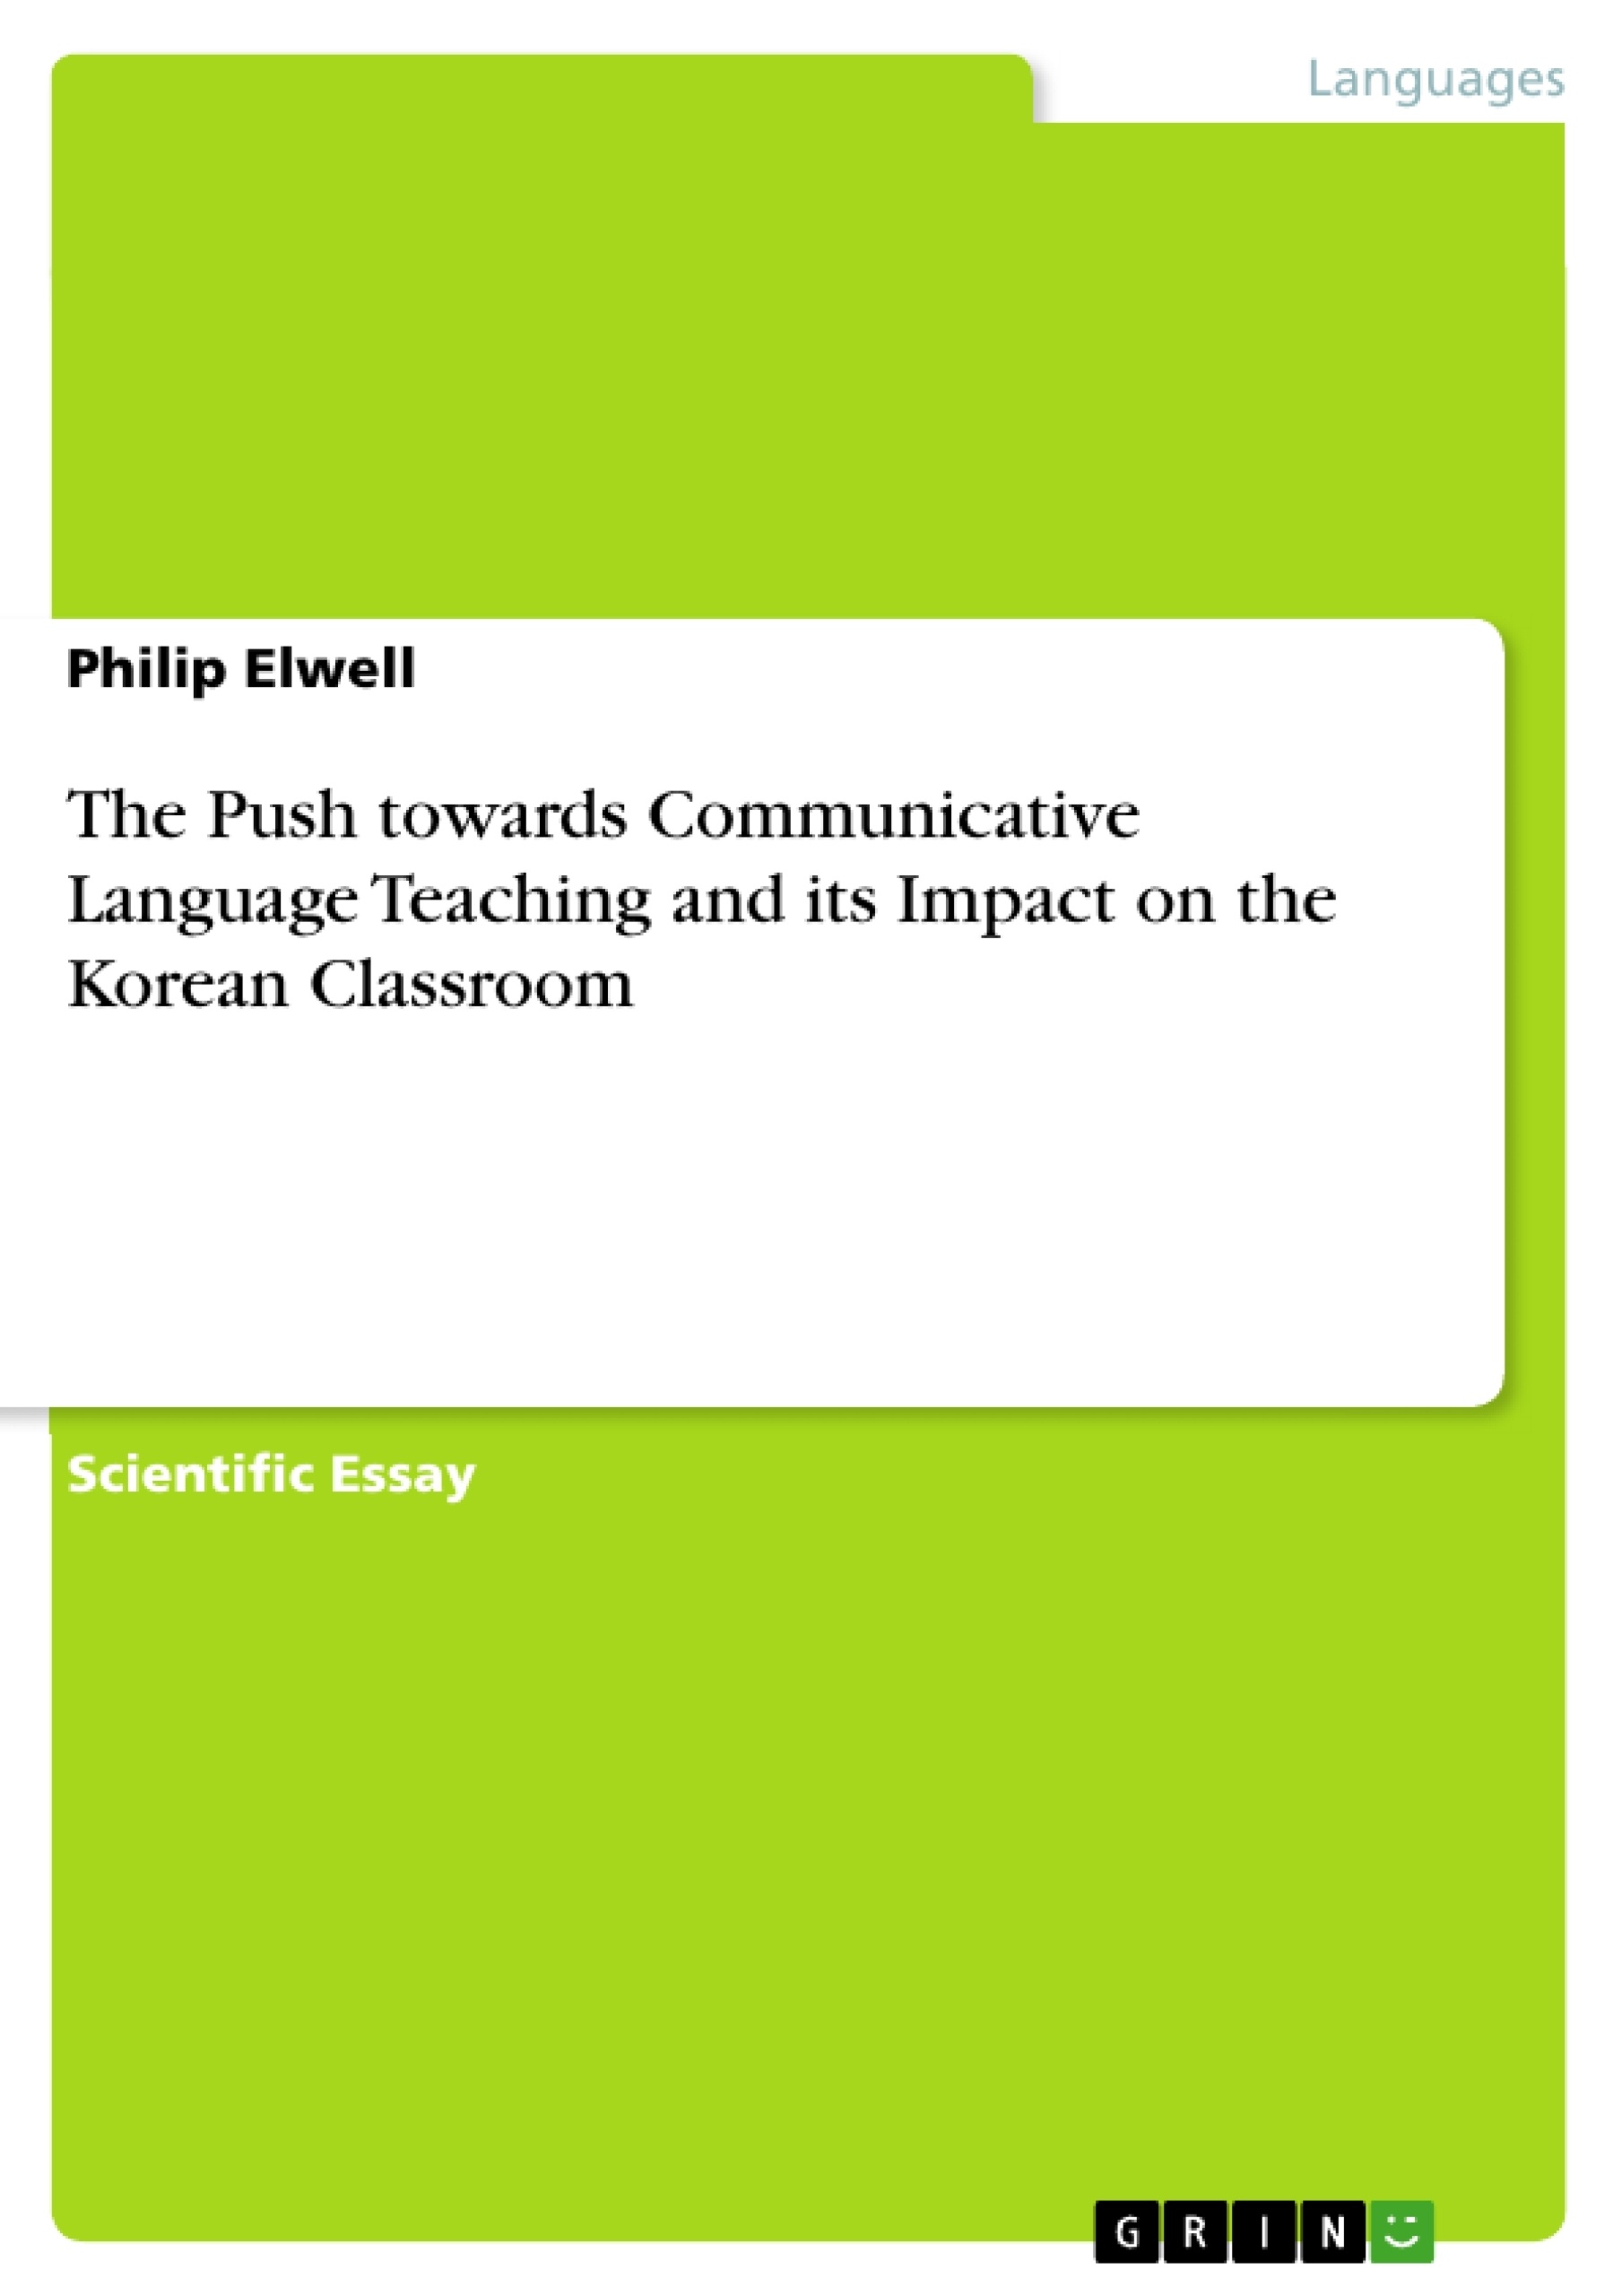 Title: The Push towards Communicative Language Teaching and its Impact on the Korean Classroom